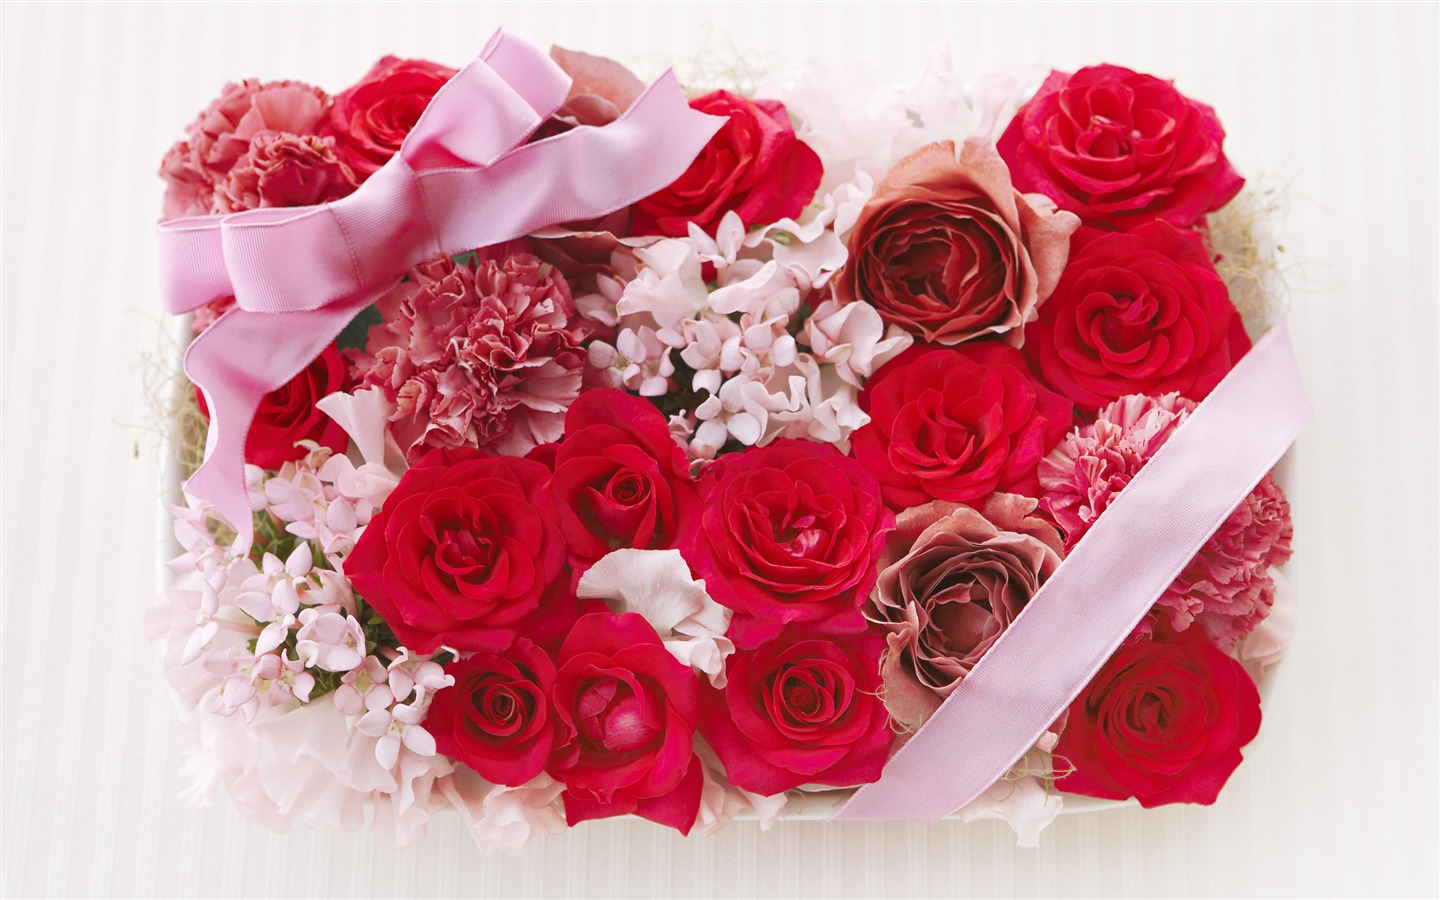 Flowers Gifts HD Wallpapers (1) #18 - 1440x900